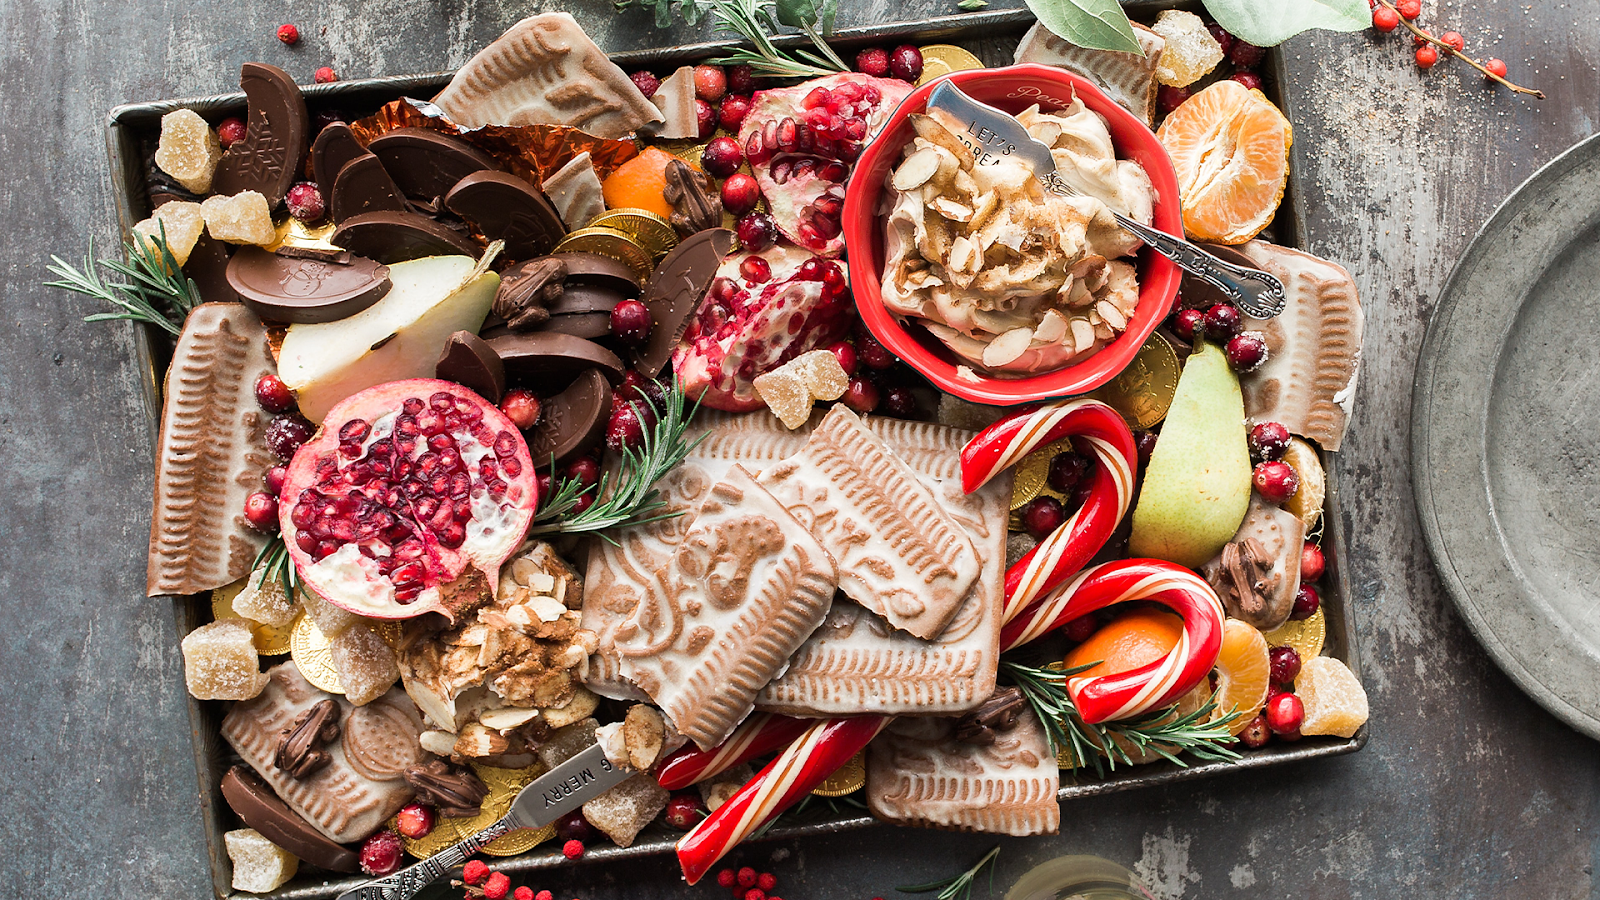 How To Avoid Holiday Snacking - Kick Your Cravings